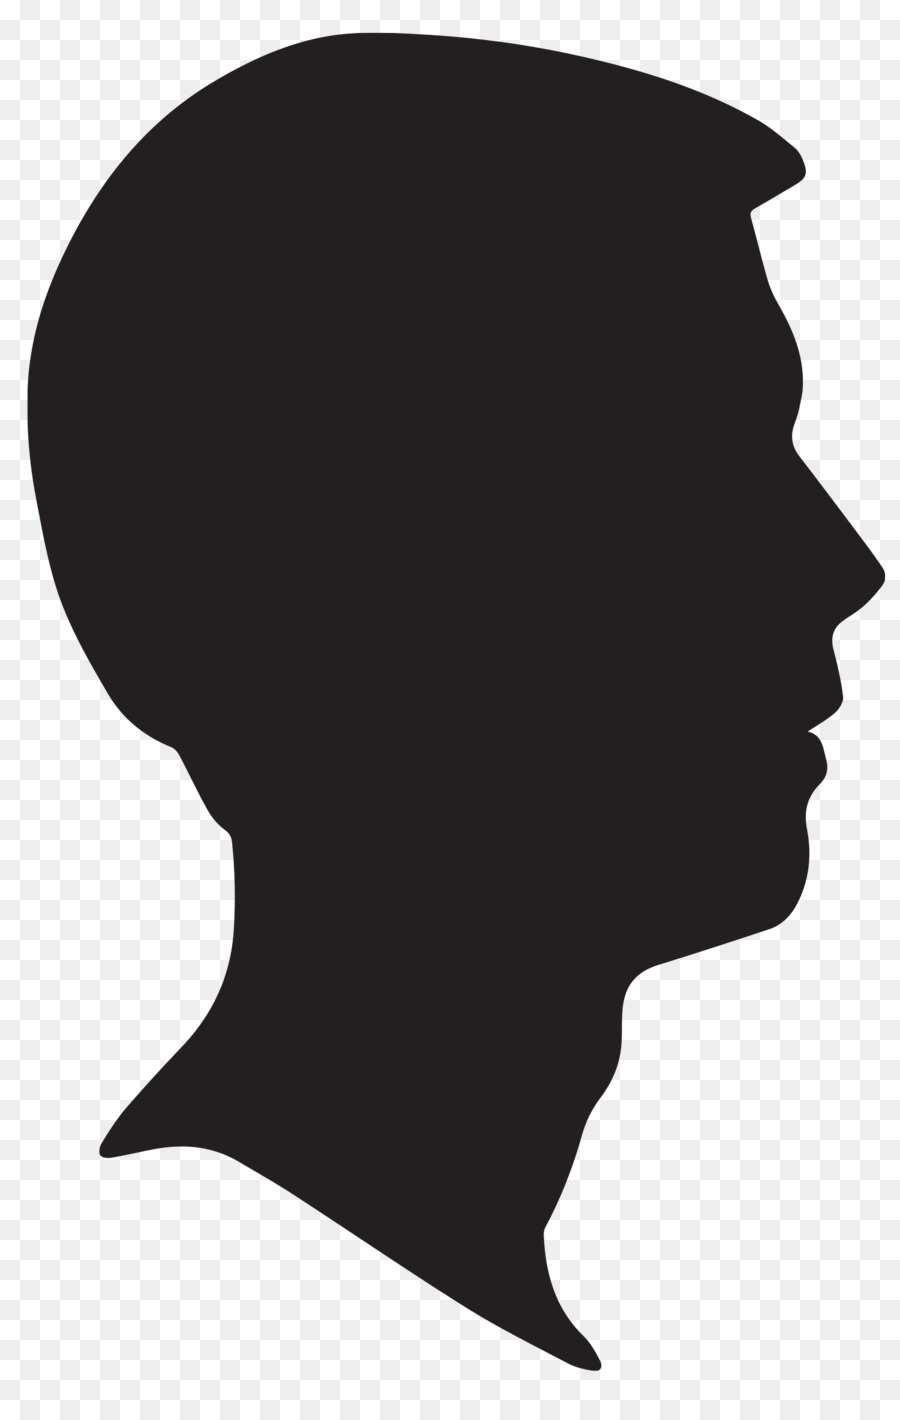 Profile of a person Clip art - vegetable Silhouette png download - 900*1412 - Free Transparent Profile Of A Person png Download.